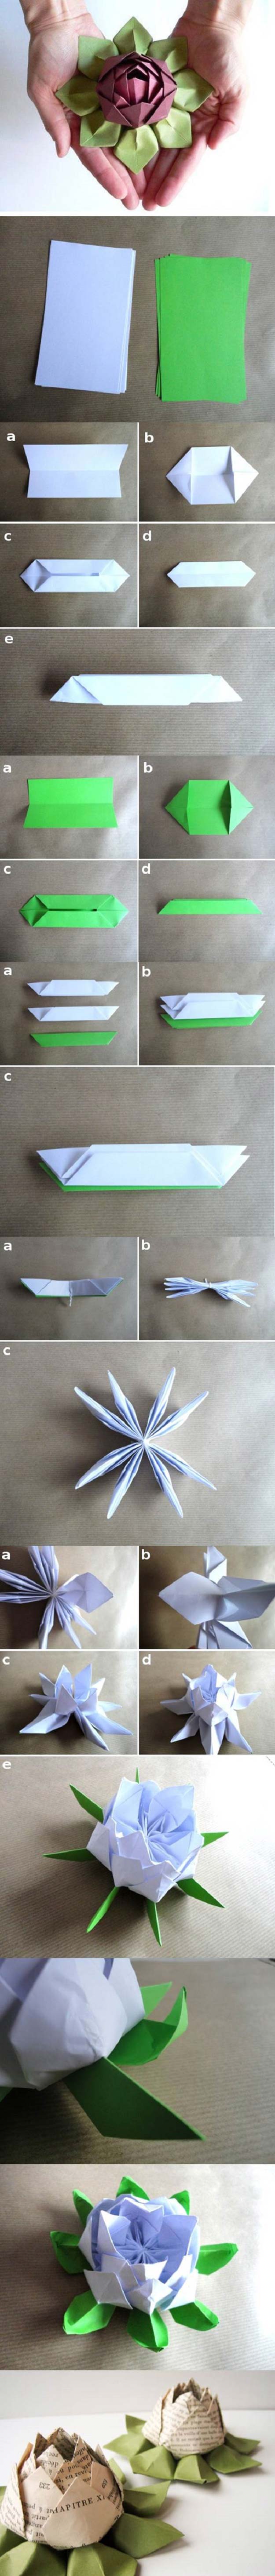 Origami Tutorials - Origami Lotus Flower - Easy DIY Origami Tutorial Projects for With Instructions for Flowers, Dog, Gift Box, Star, Owl, Buttlerfly, Heart and Bookmark, Animals - Fun Paper Crafts for Teens, Kids and Adults #origami #crafts